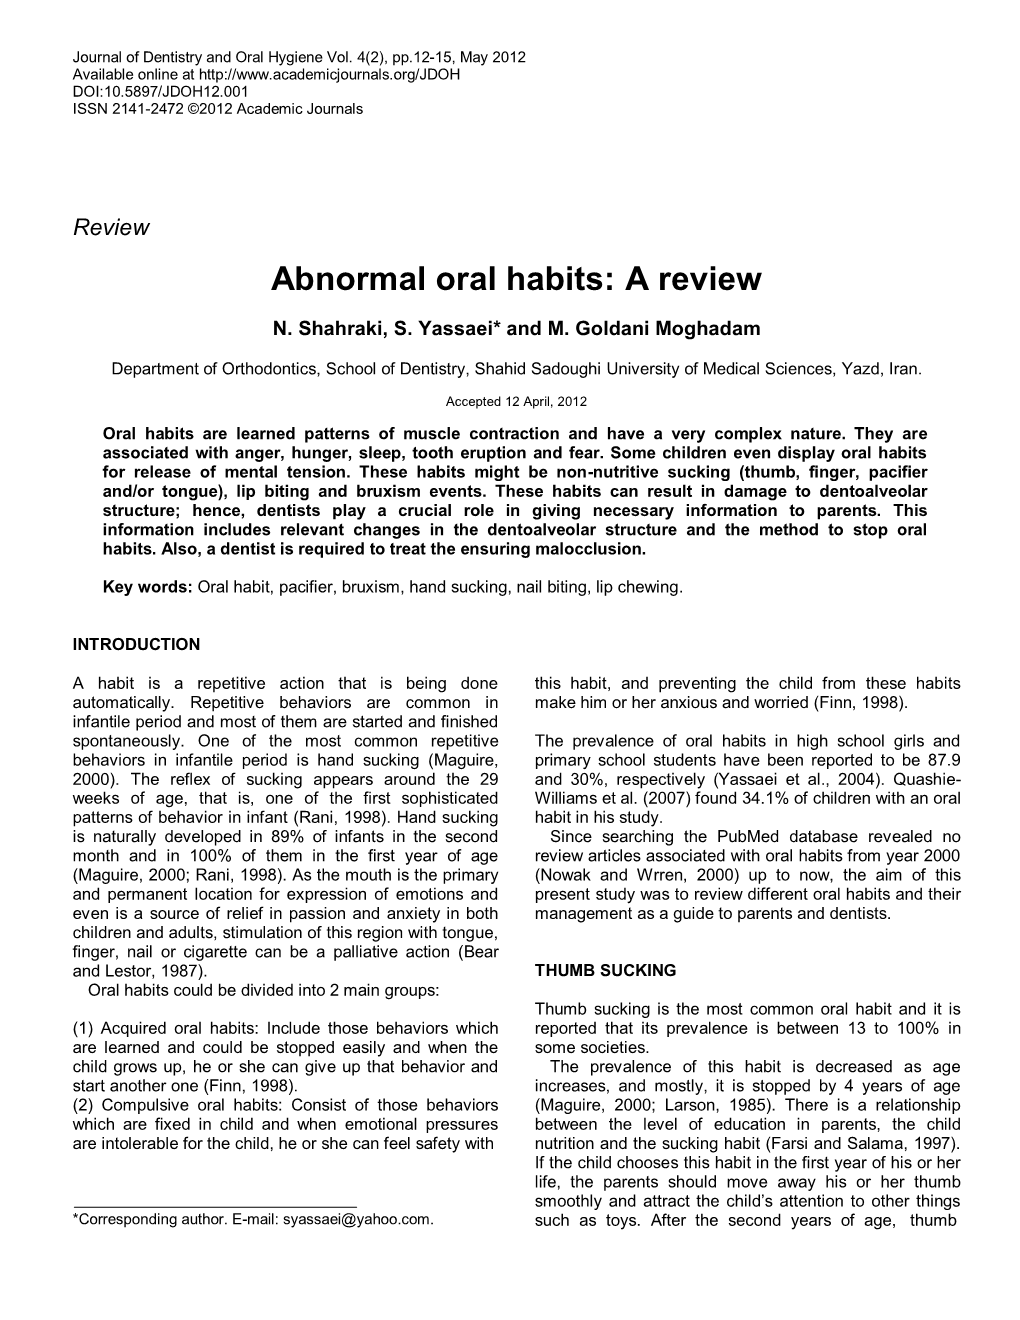 Abnormal Oral Habits: a Review